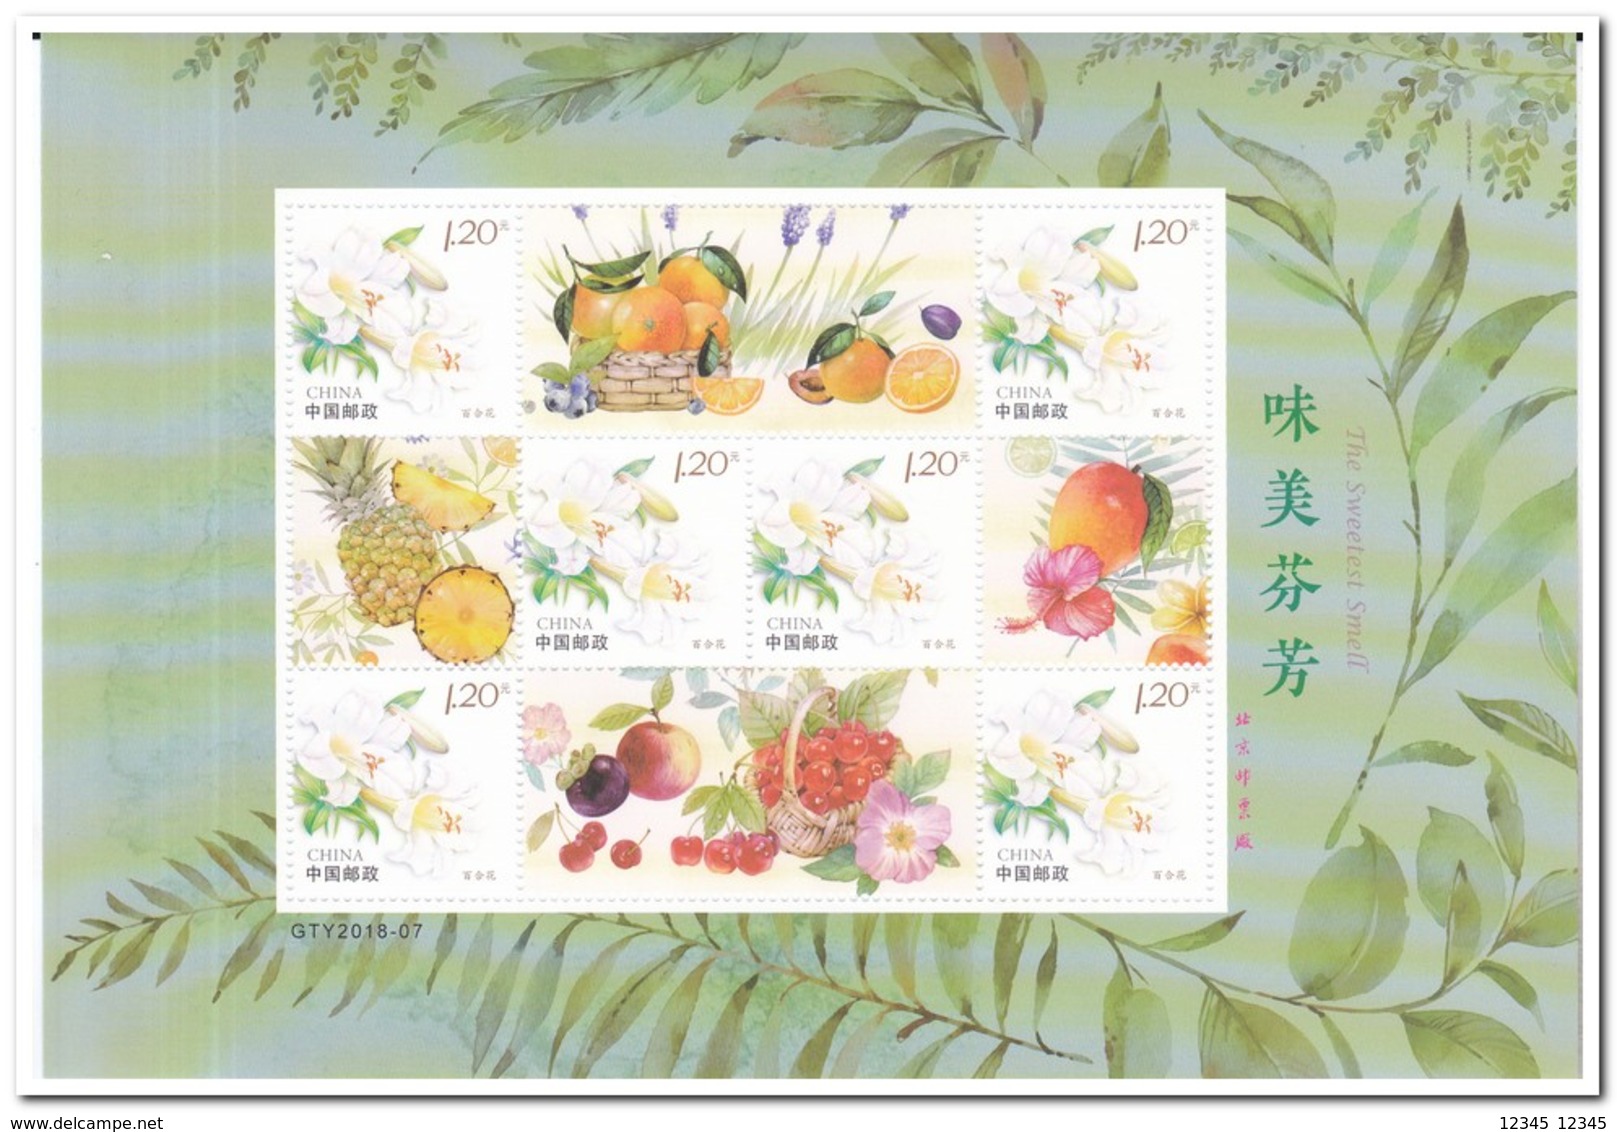 China GTY2018-07, Postfris MNH, Fruit, Flowers - Unused Stamps